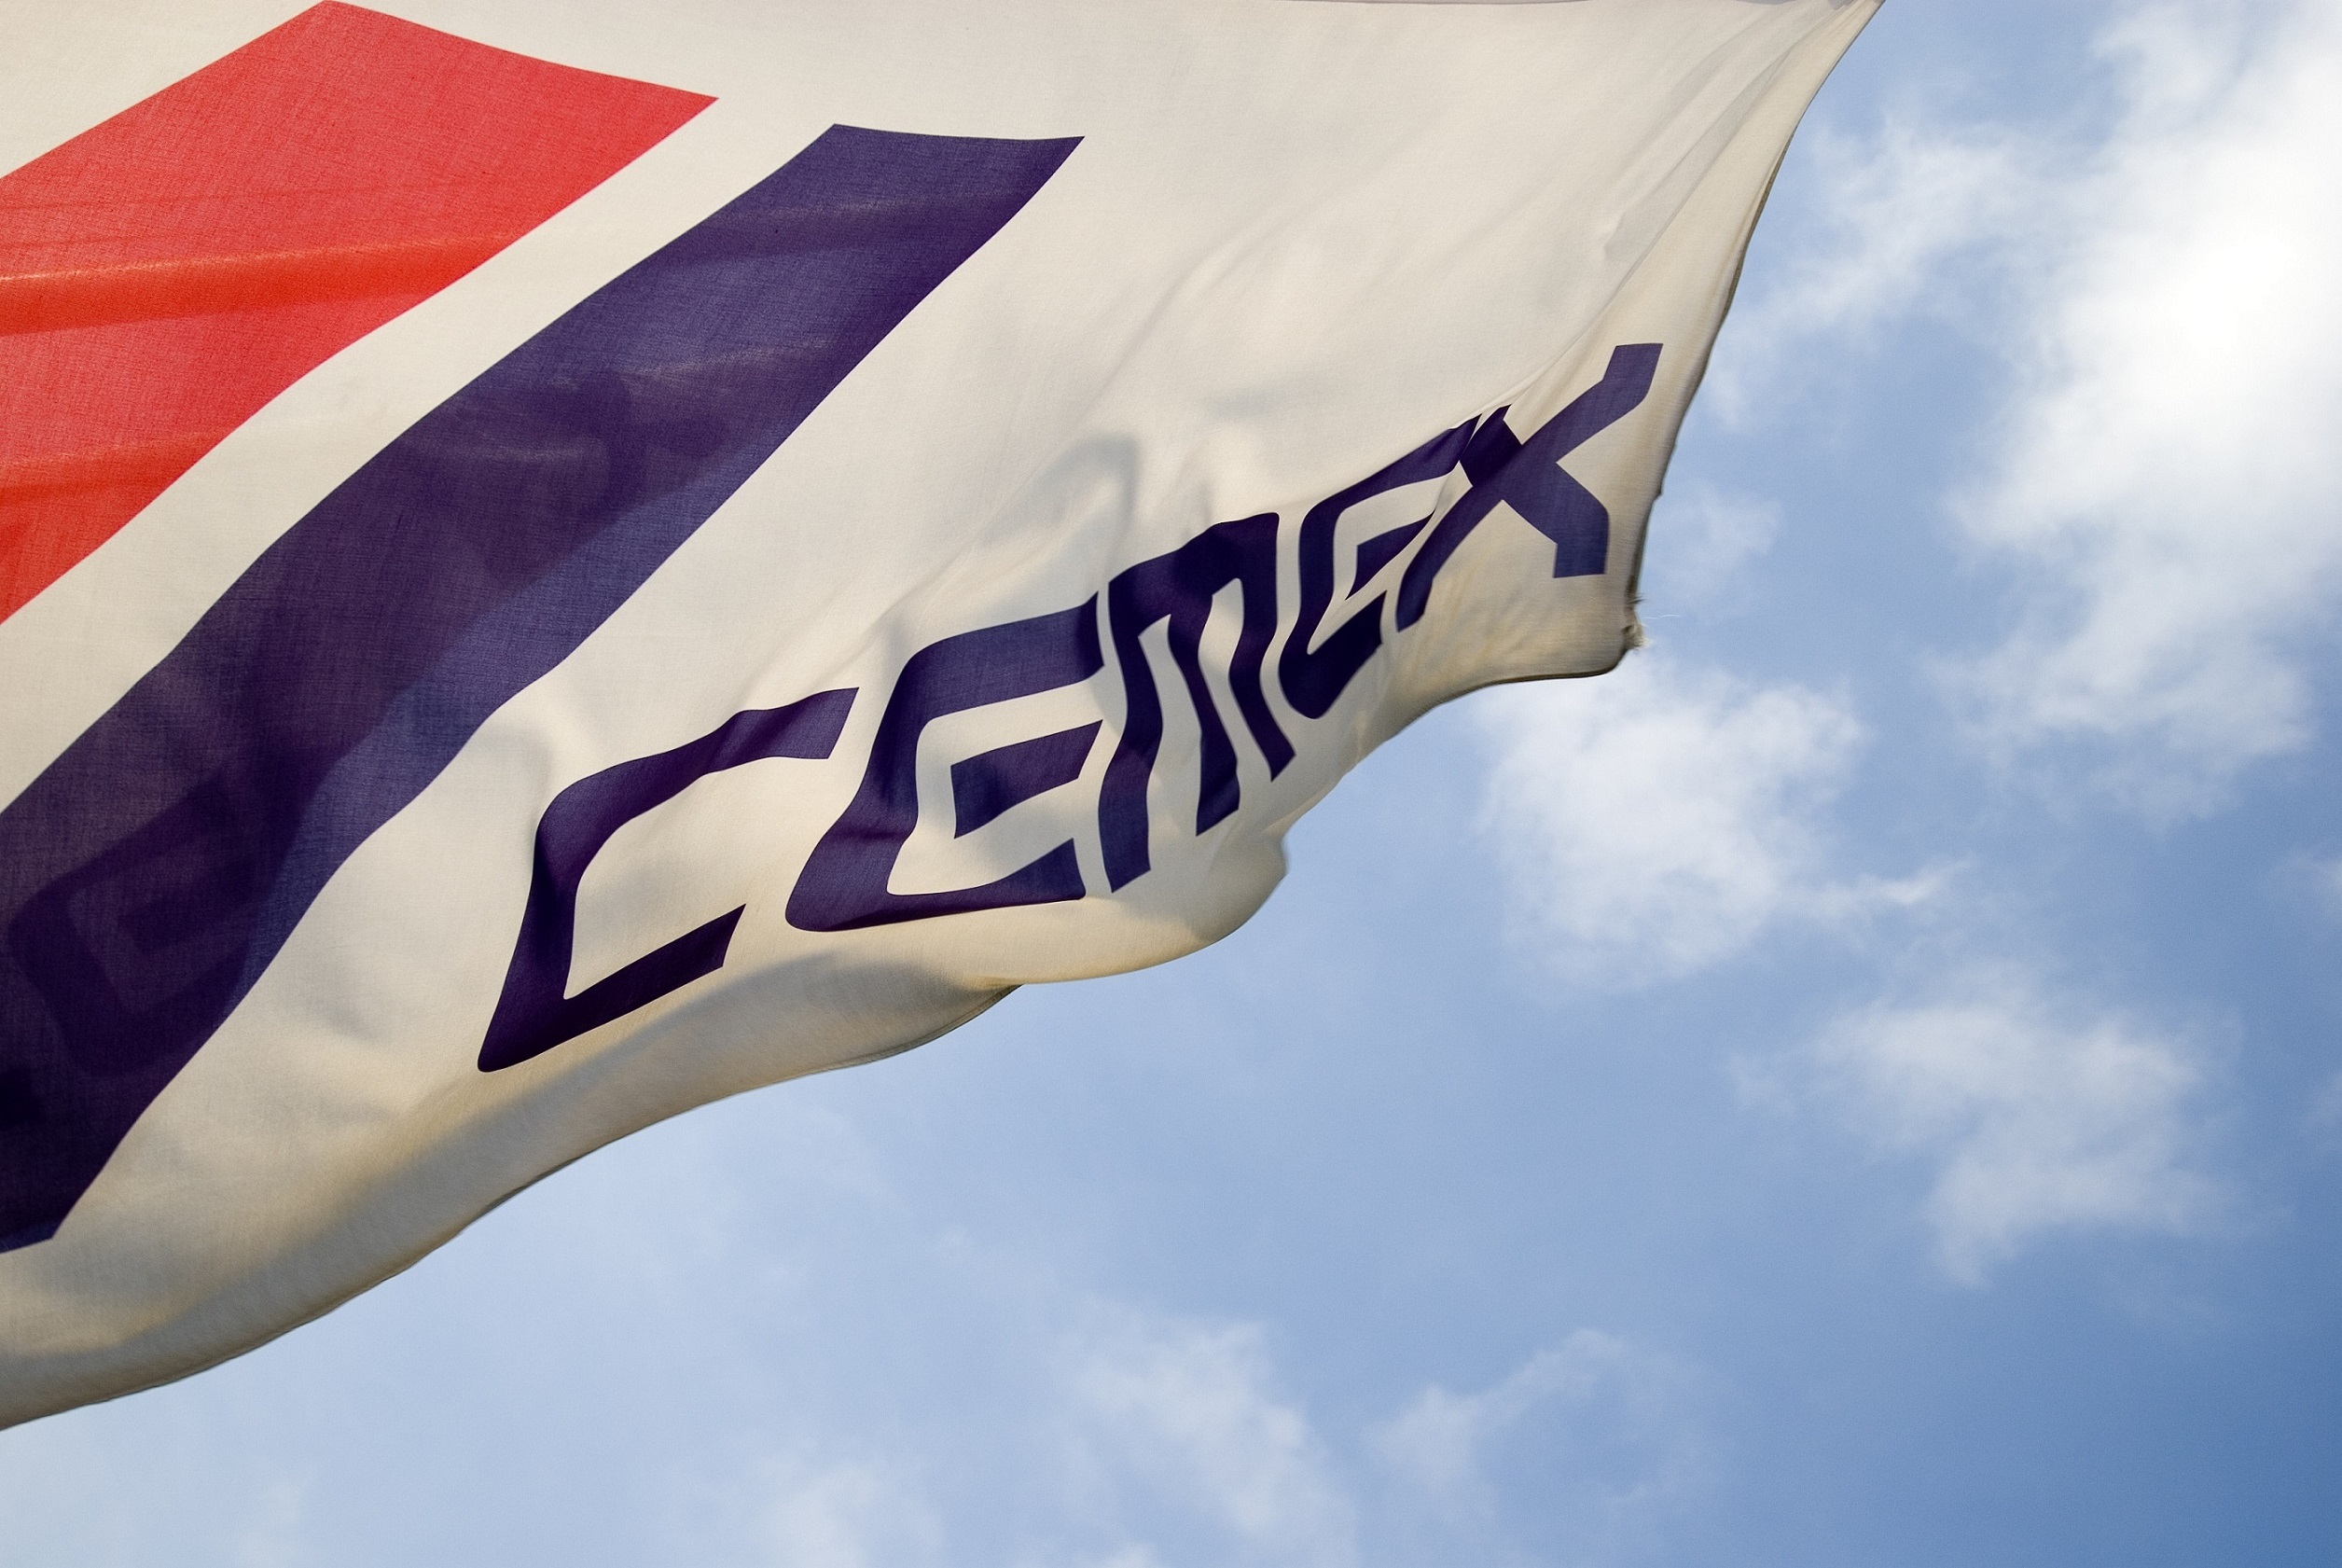 The sale is part of CEMEX's Operation Resilience strategic plan